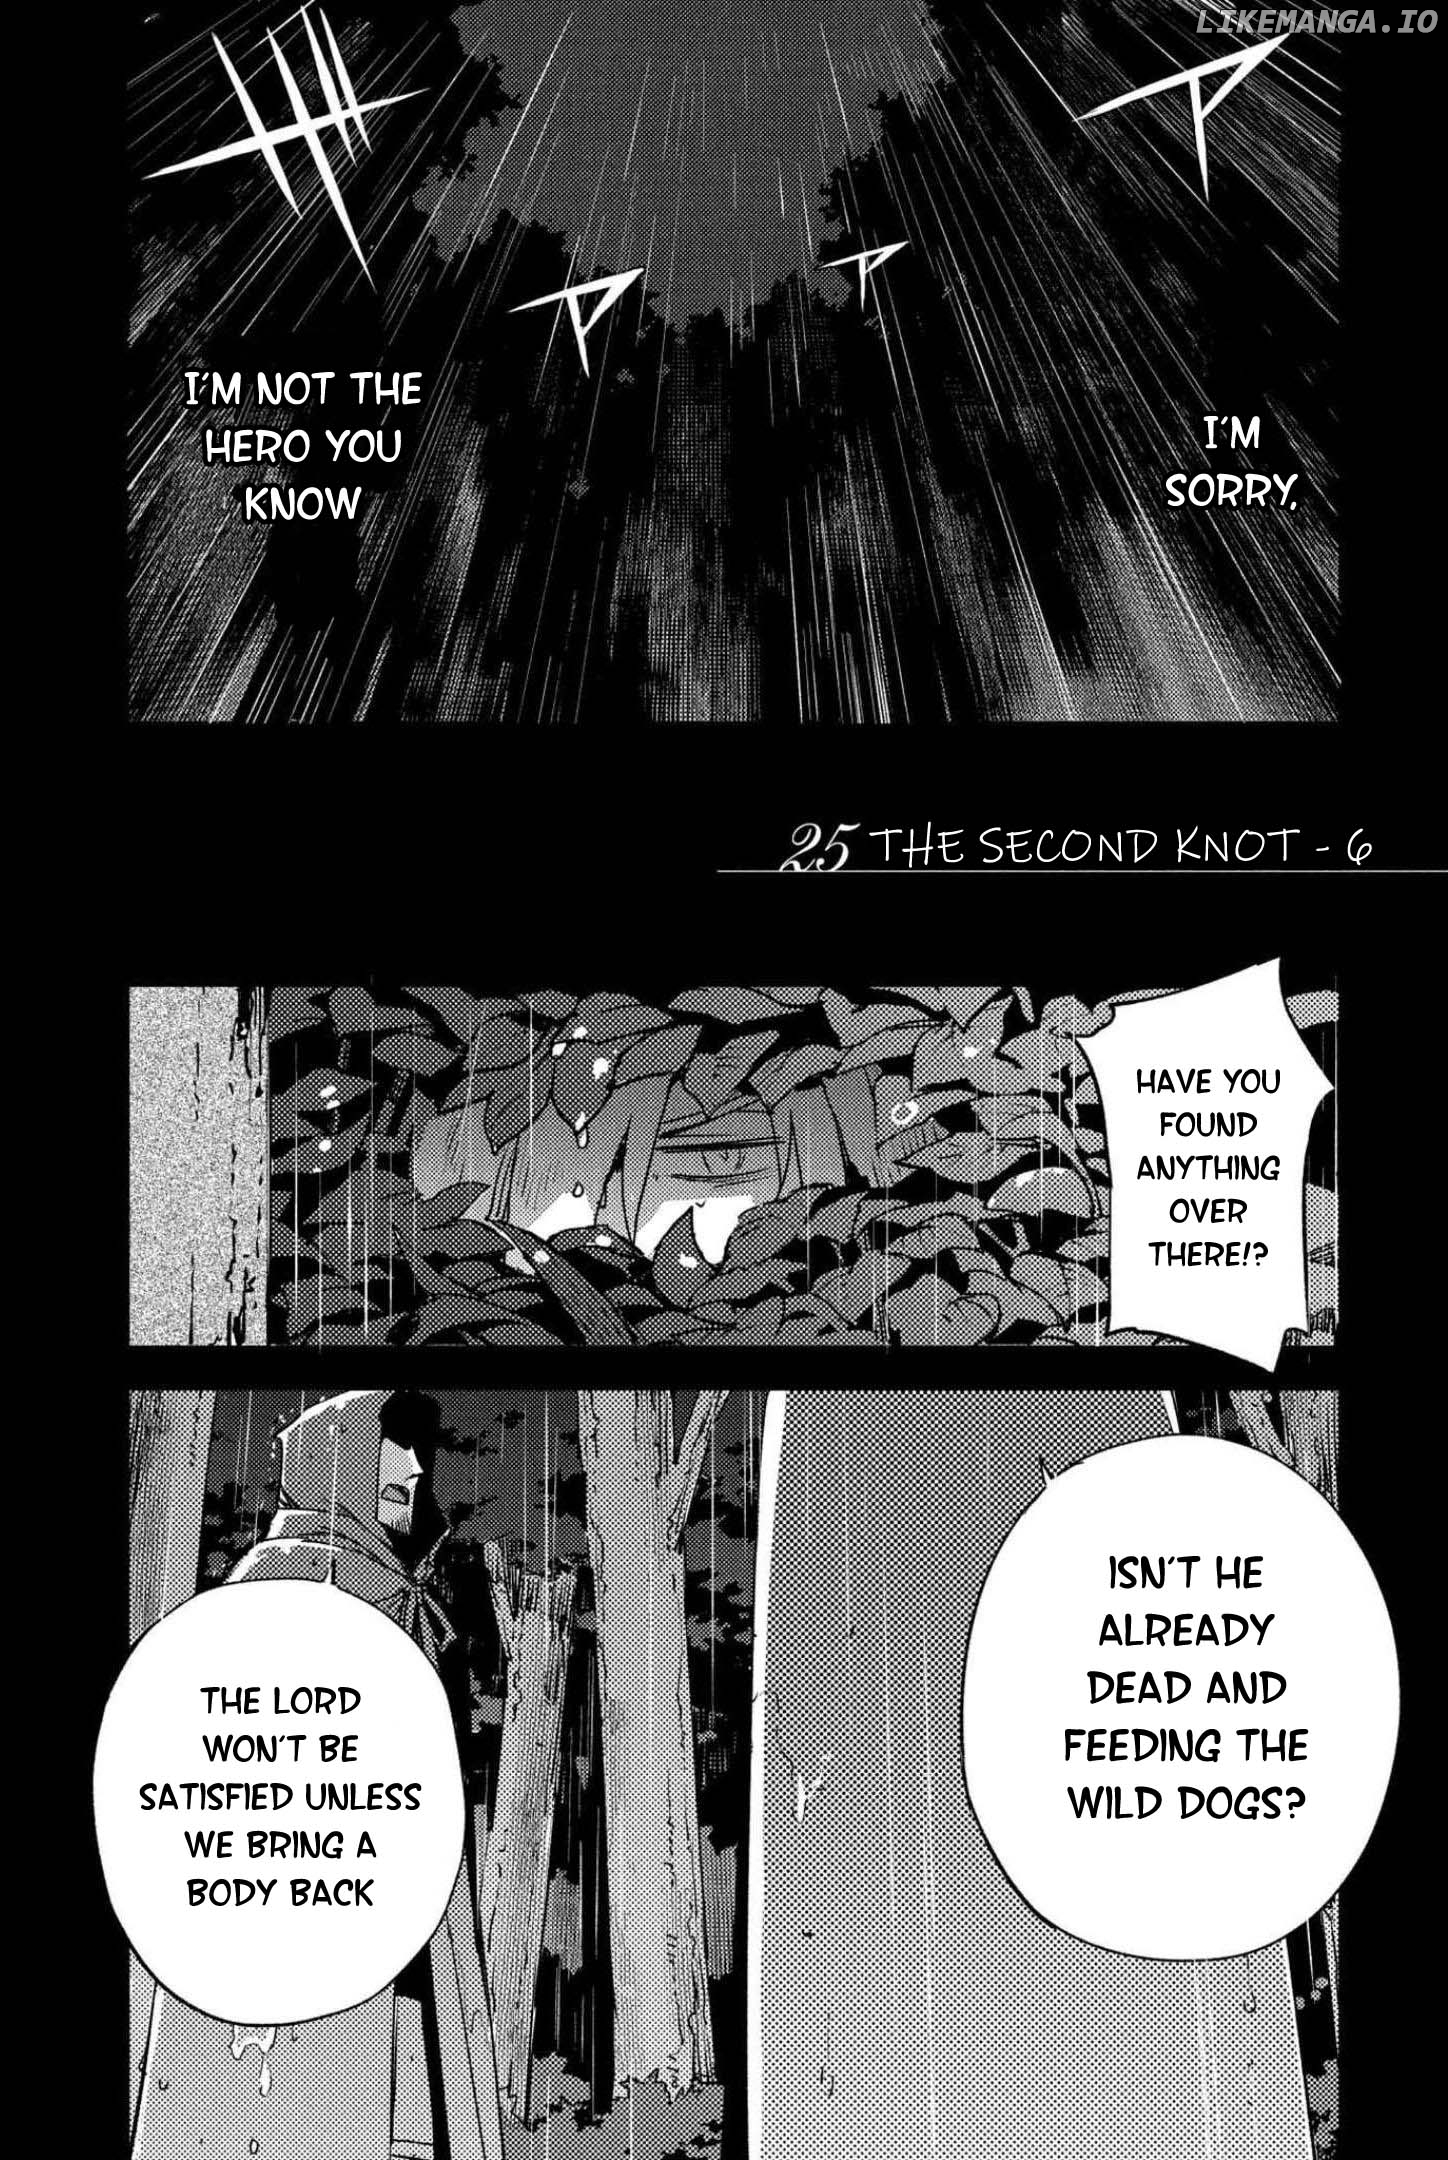 Fate/Grand Order: Epic of Remnant - Subspecies Singularity IV: Taboo Advent Salem: Salem of Heresy Chapter 25 - page 2